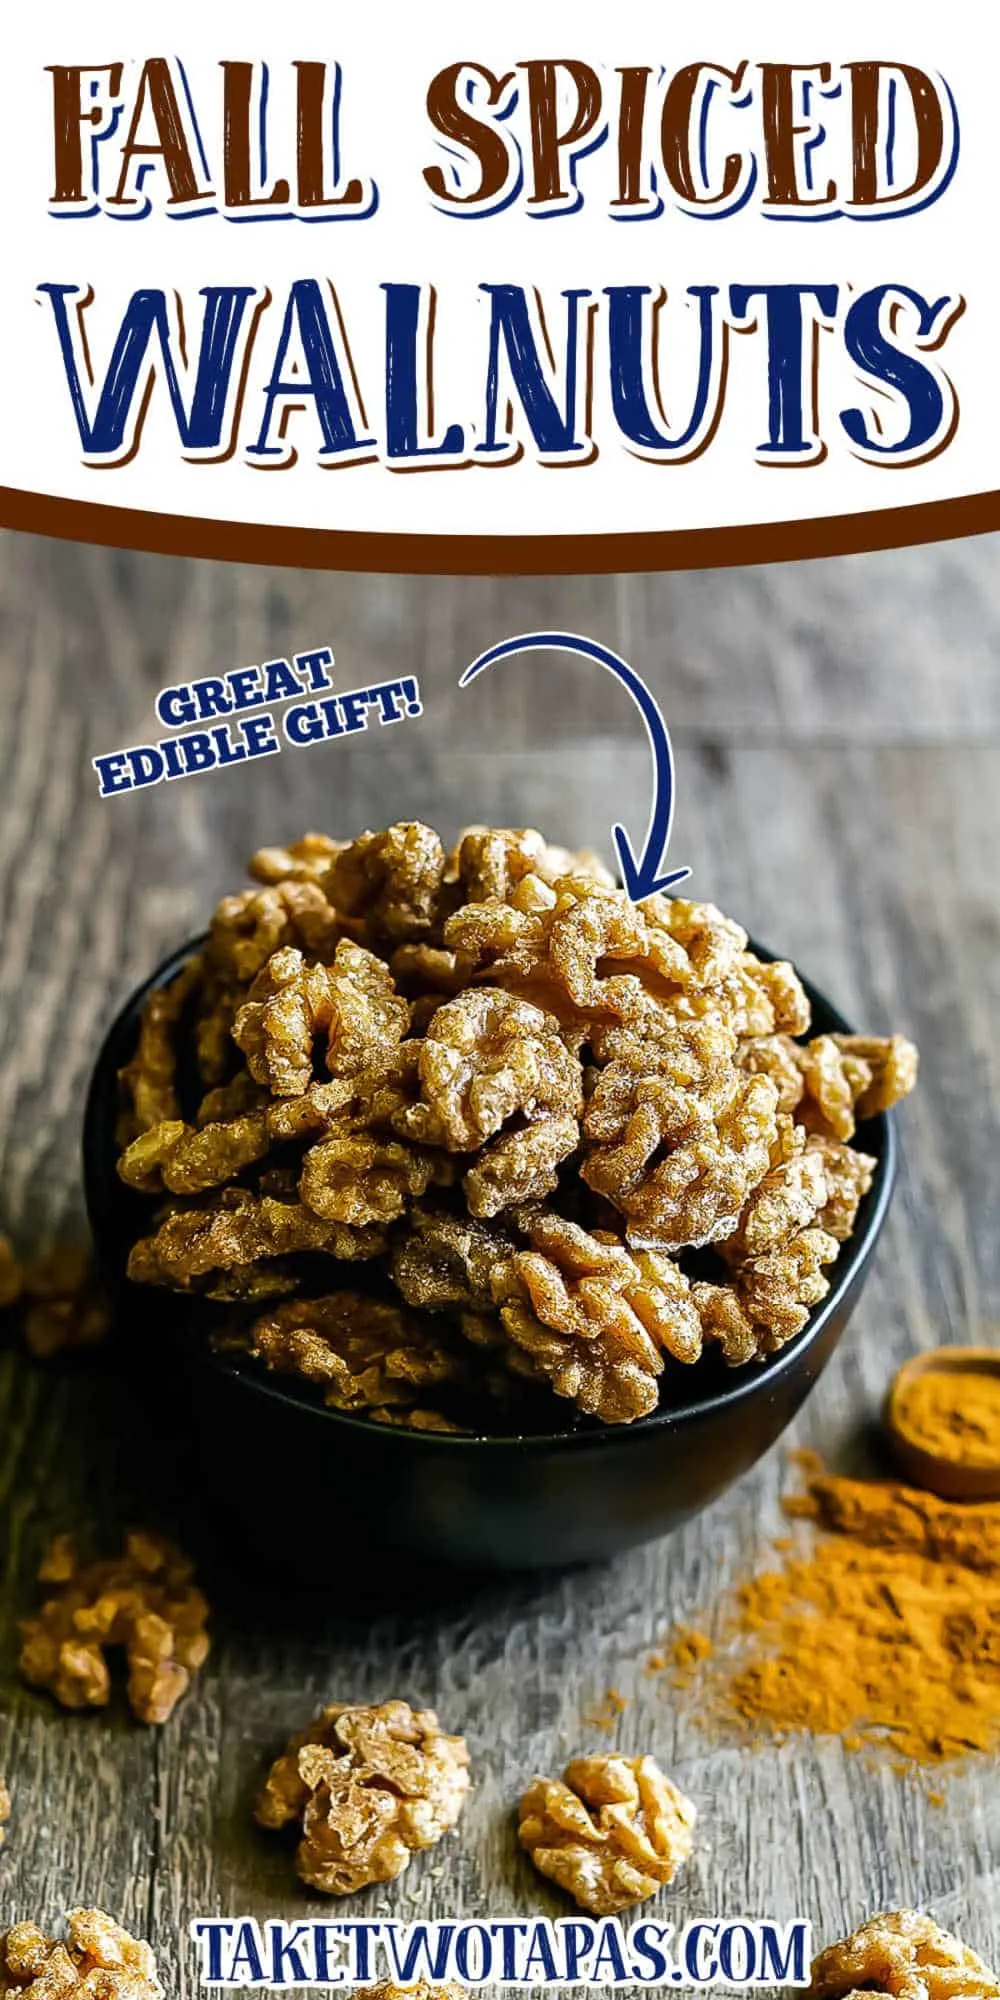 Pinterest image with text "fall spiced walnuts"